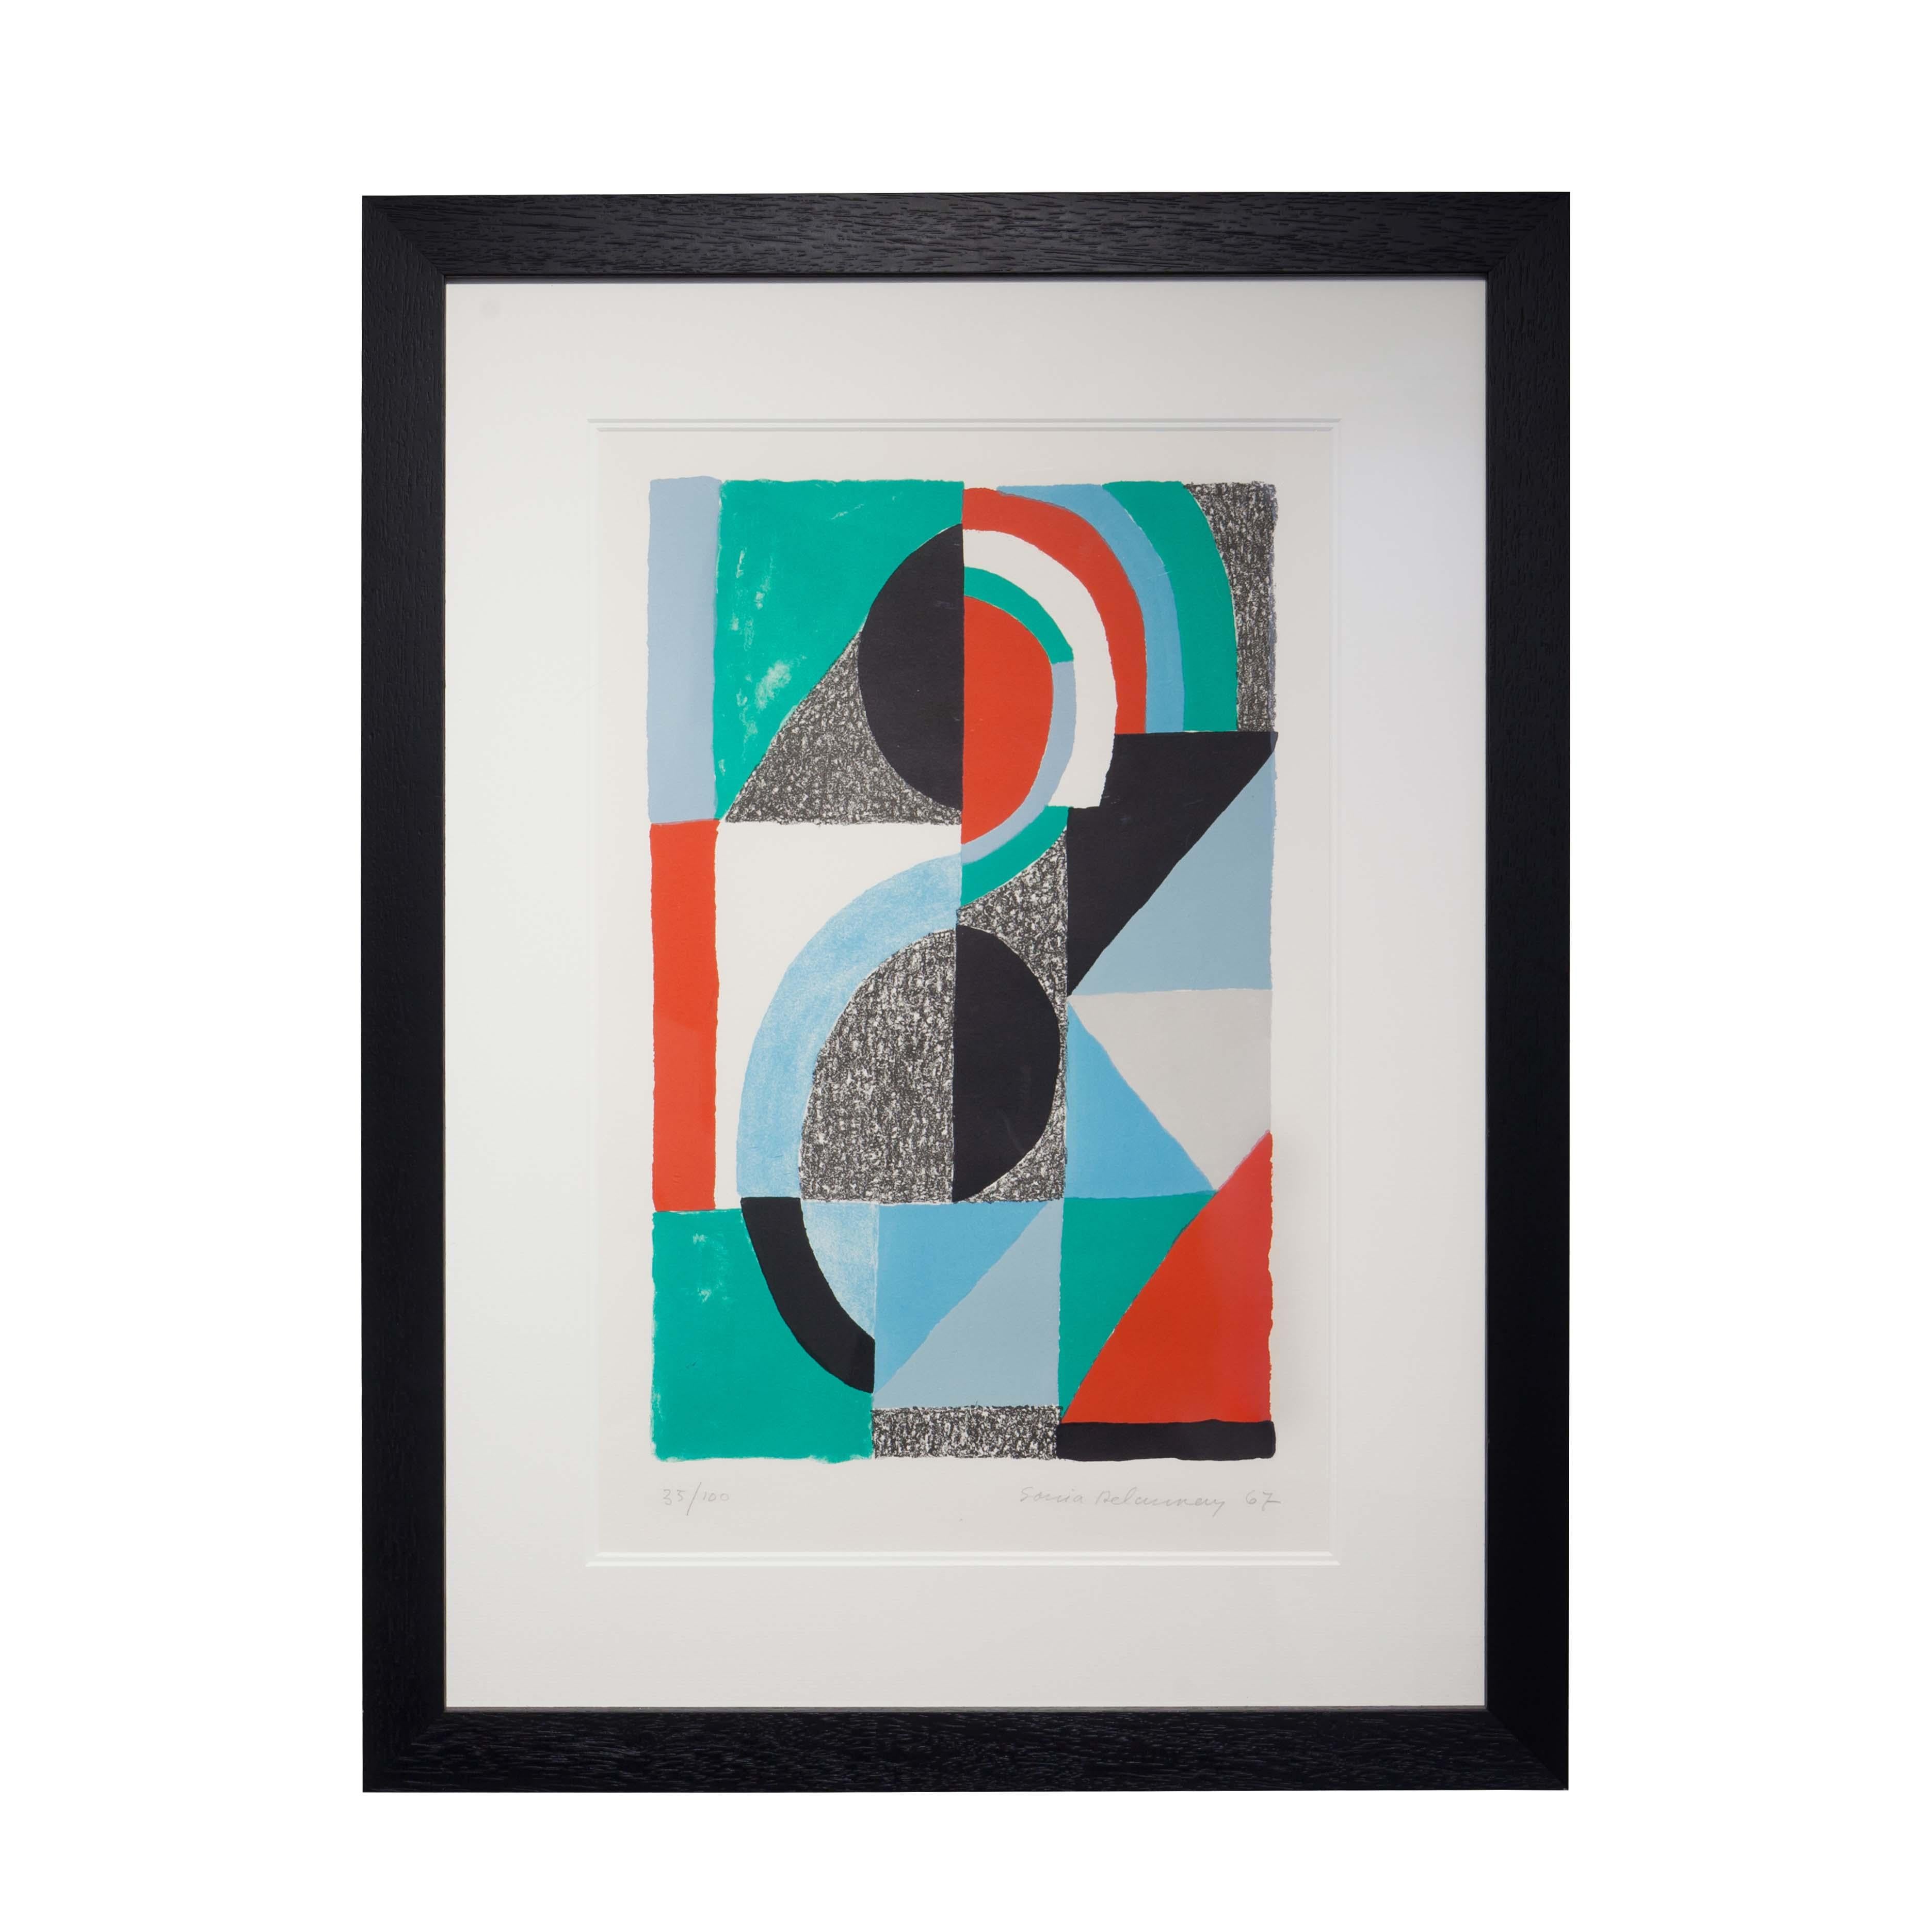 Oriflamme - Print by Sonia Delaunay